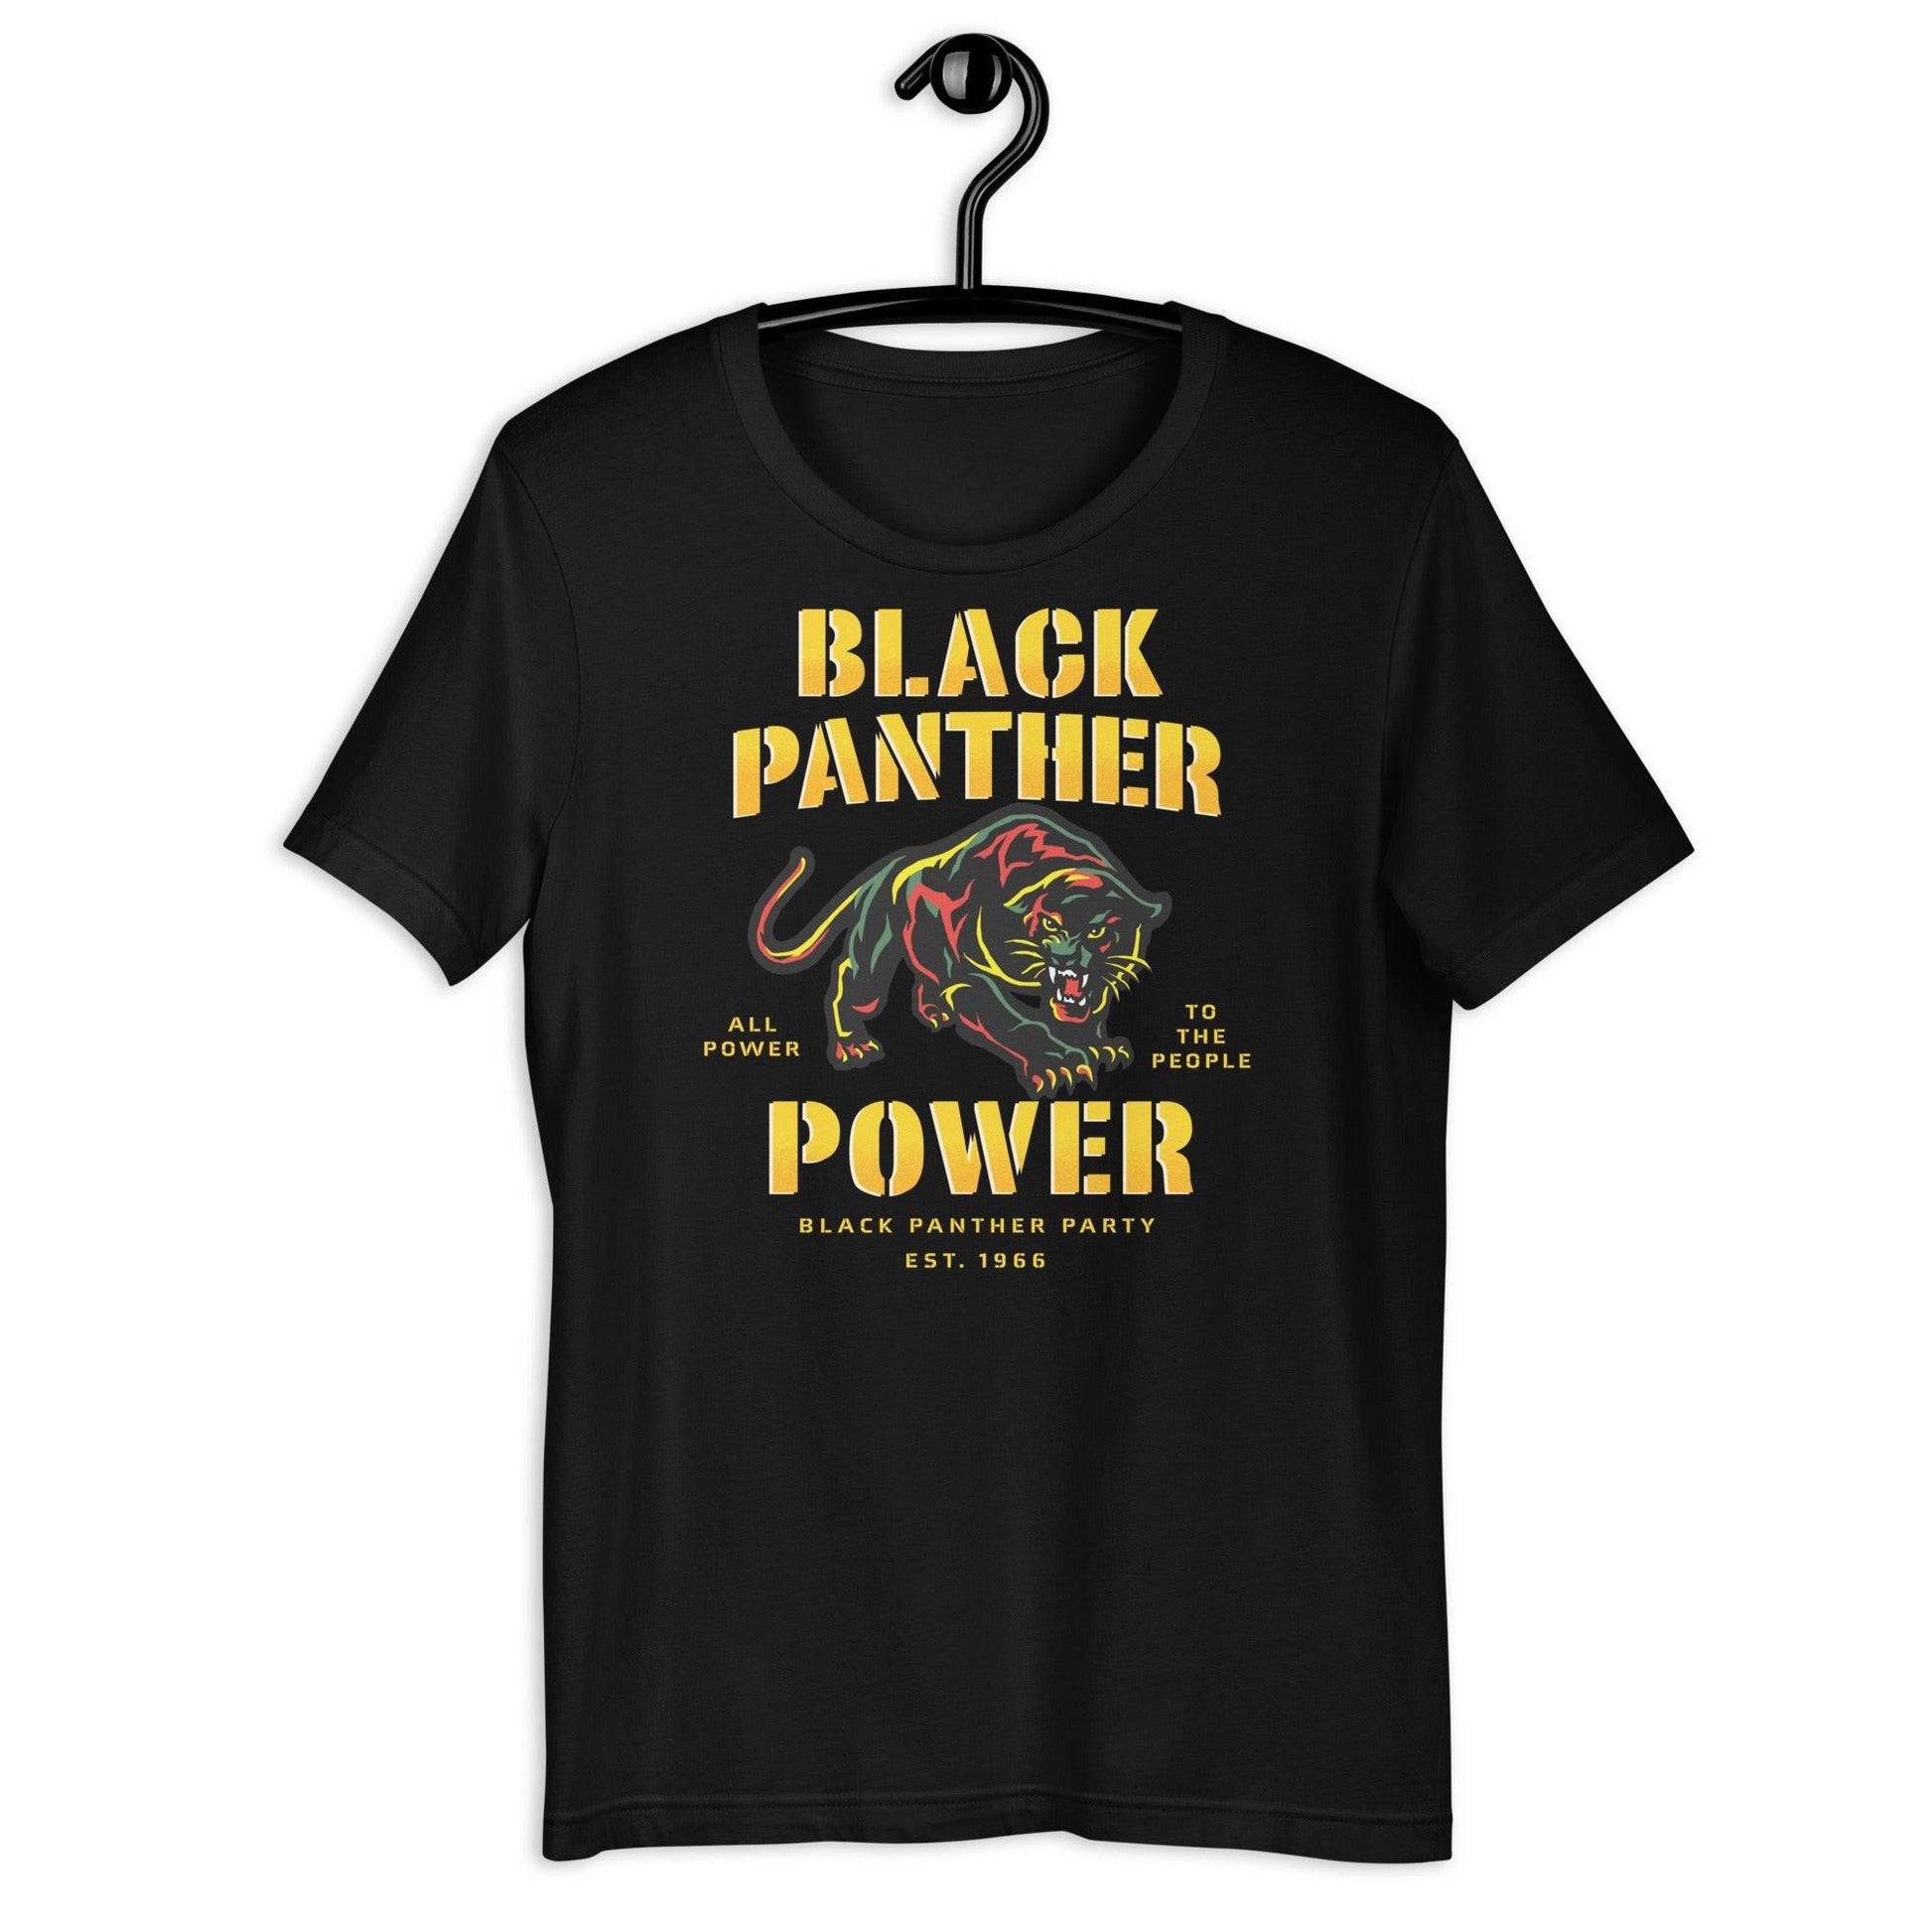 a black panther t - shirt hanging on a hanger